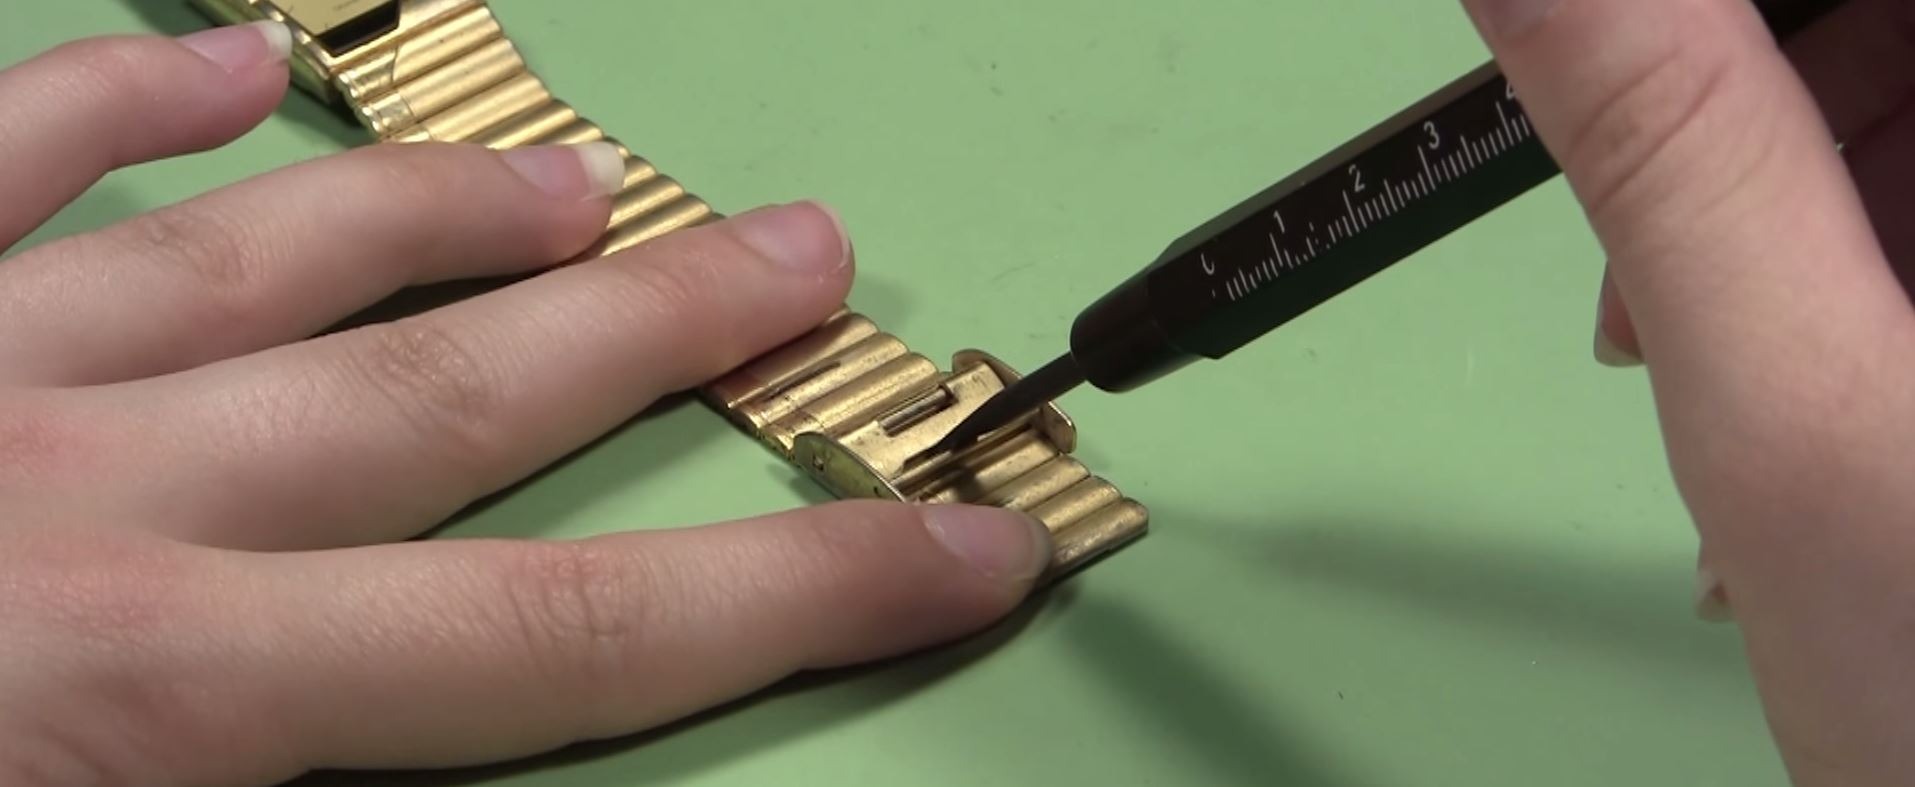 How To Open A Watch Clasp